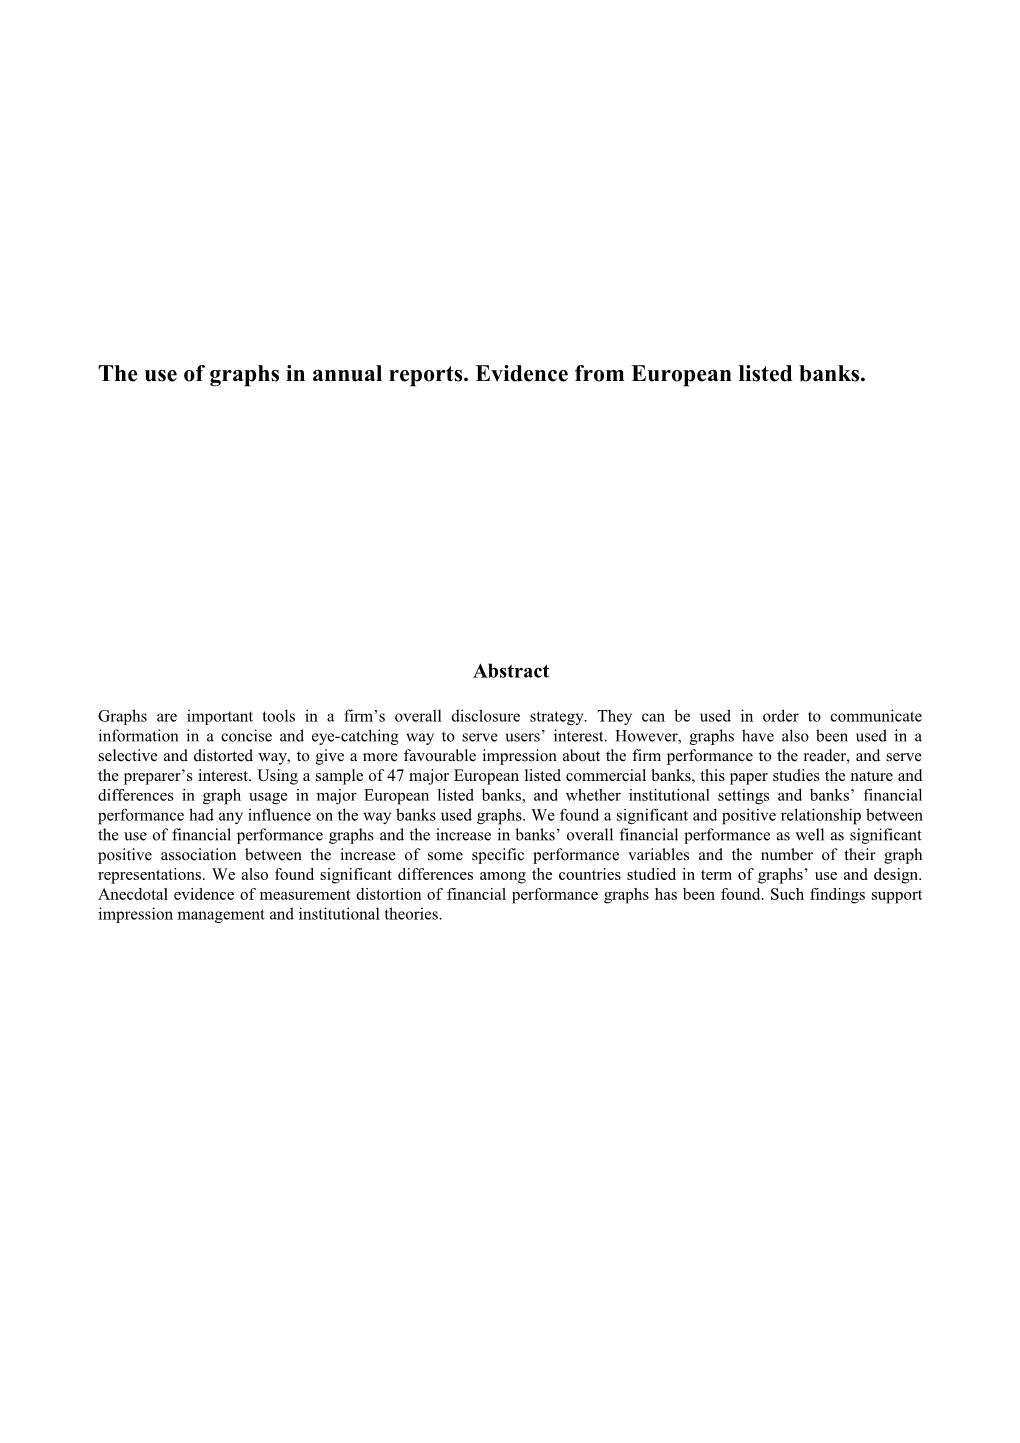 The Use of Graphs in Annual Reports. Evidence from European Listed Banks